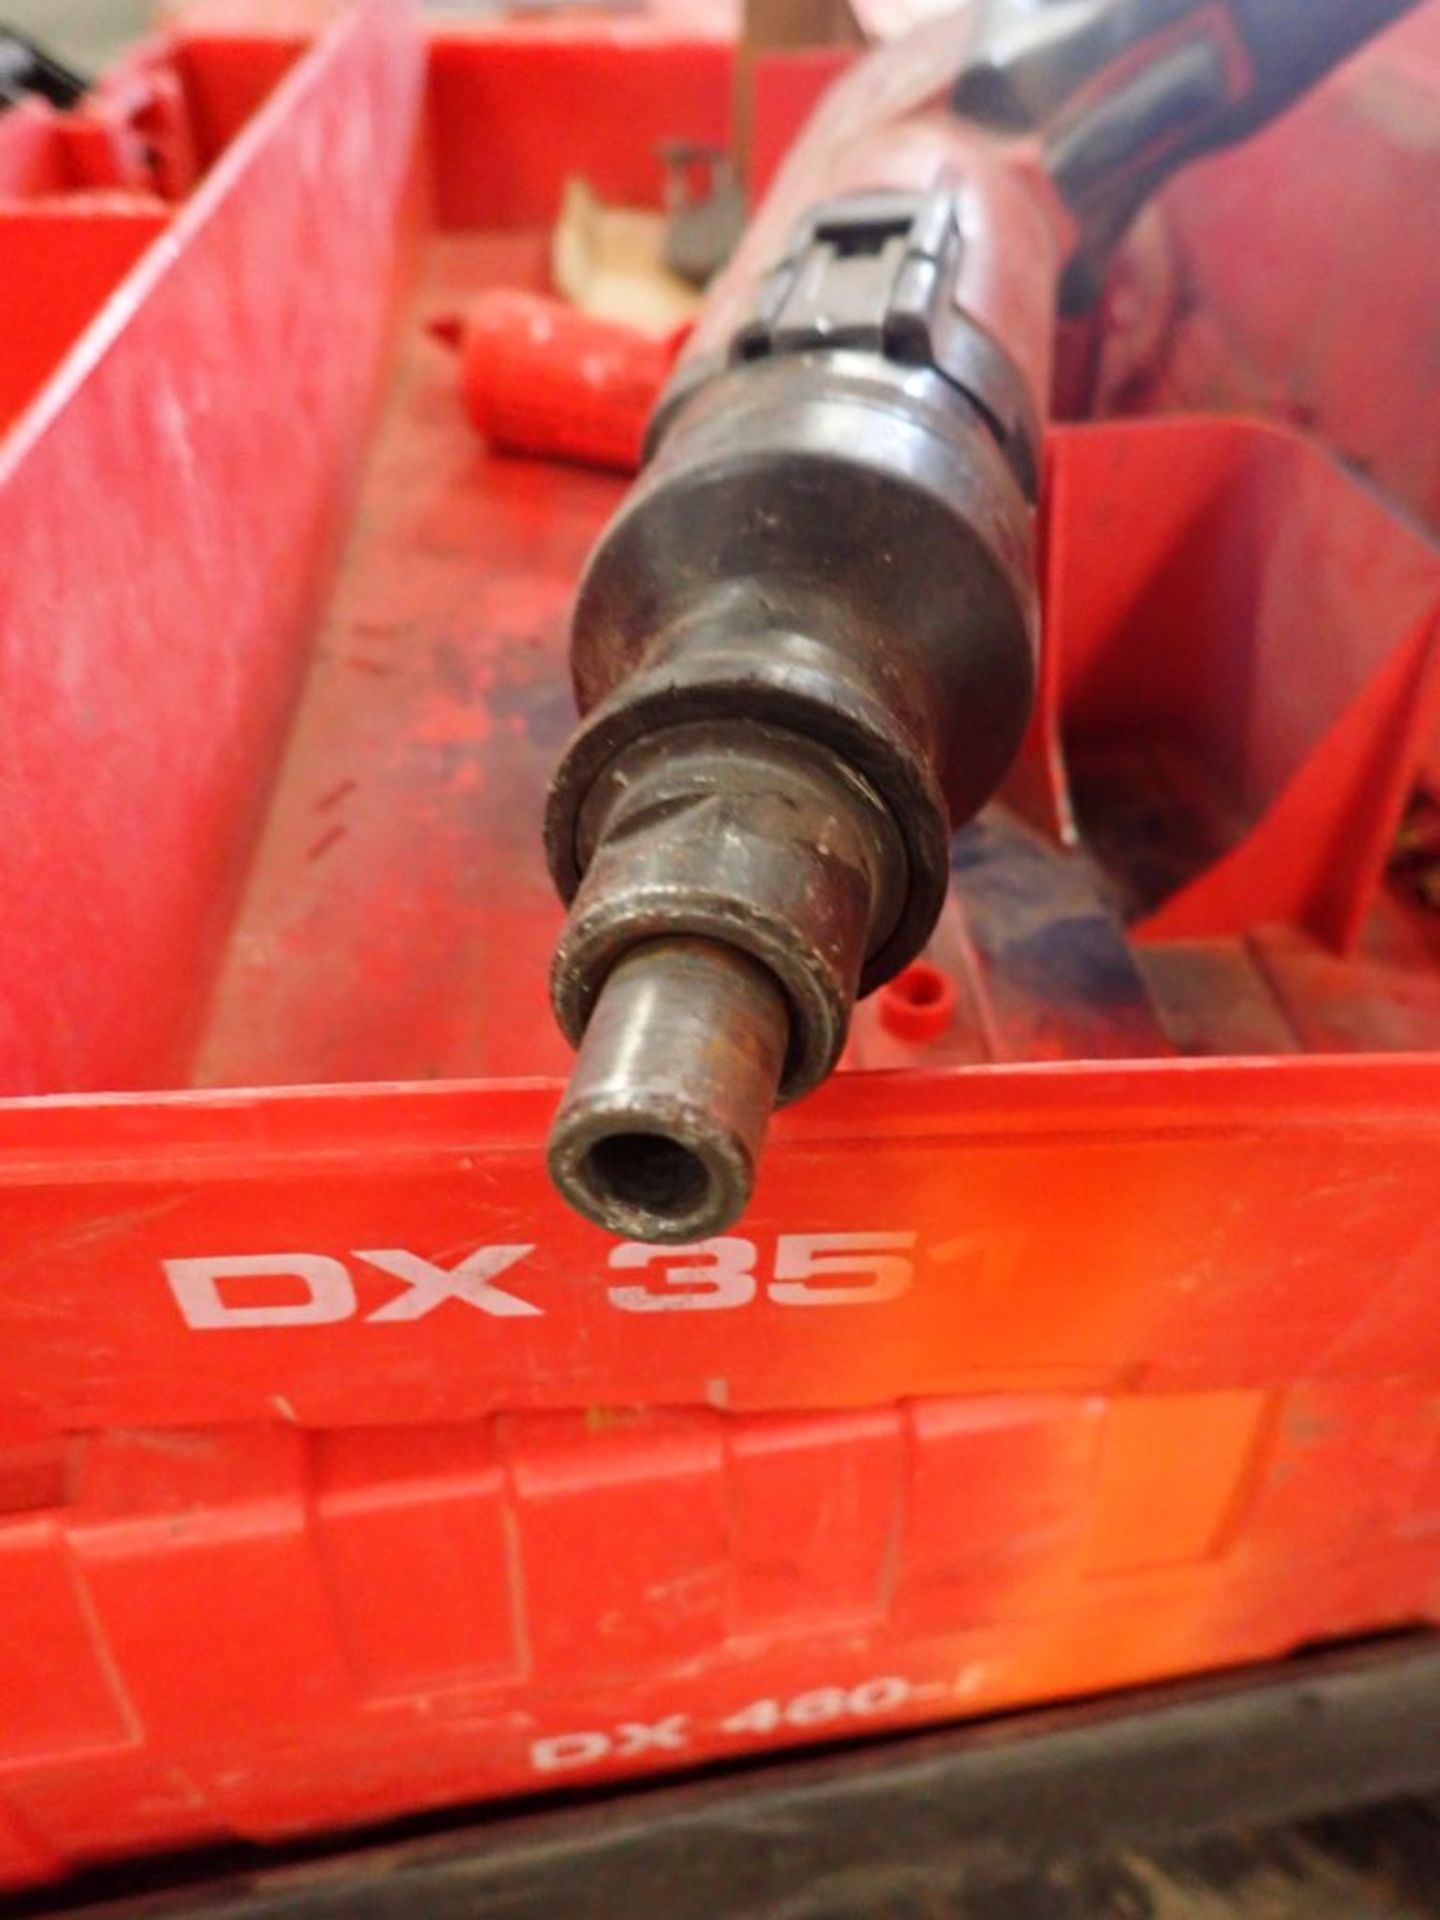 Lot of (2) Hilti Powder Actuated Fastening Tools | (1) Model No. DX-36-M; (1) DX-A-40 - Image 7 of 12